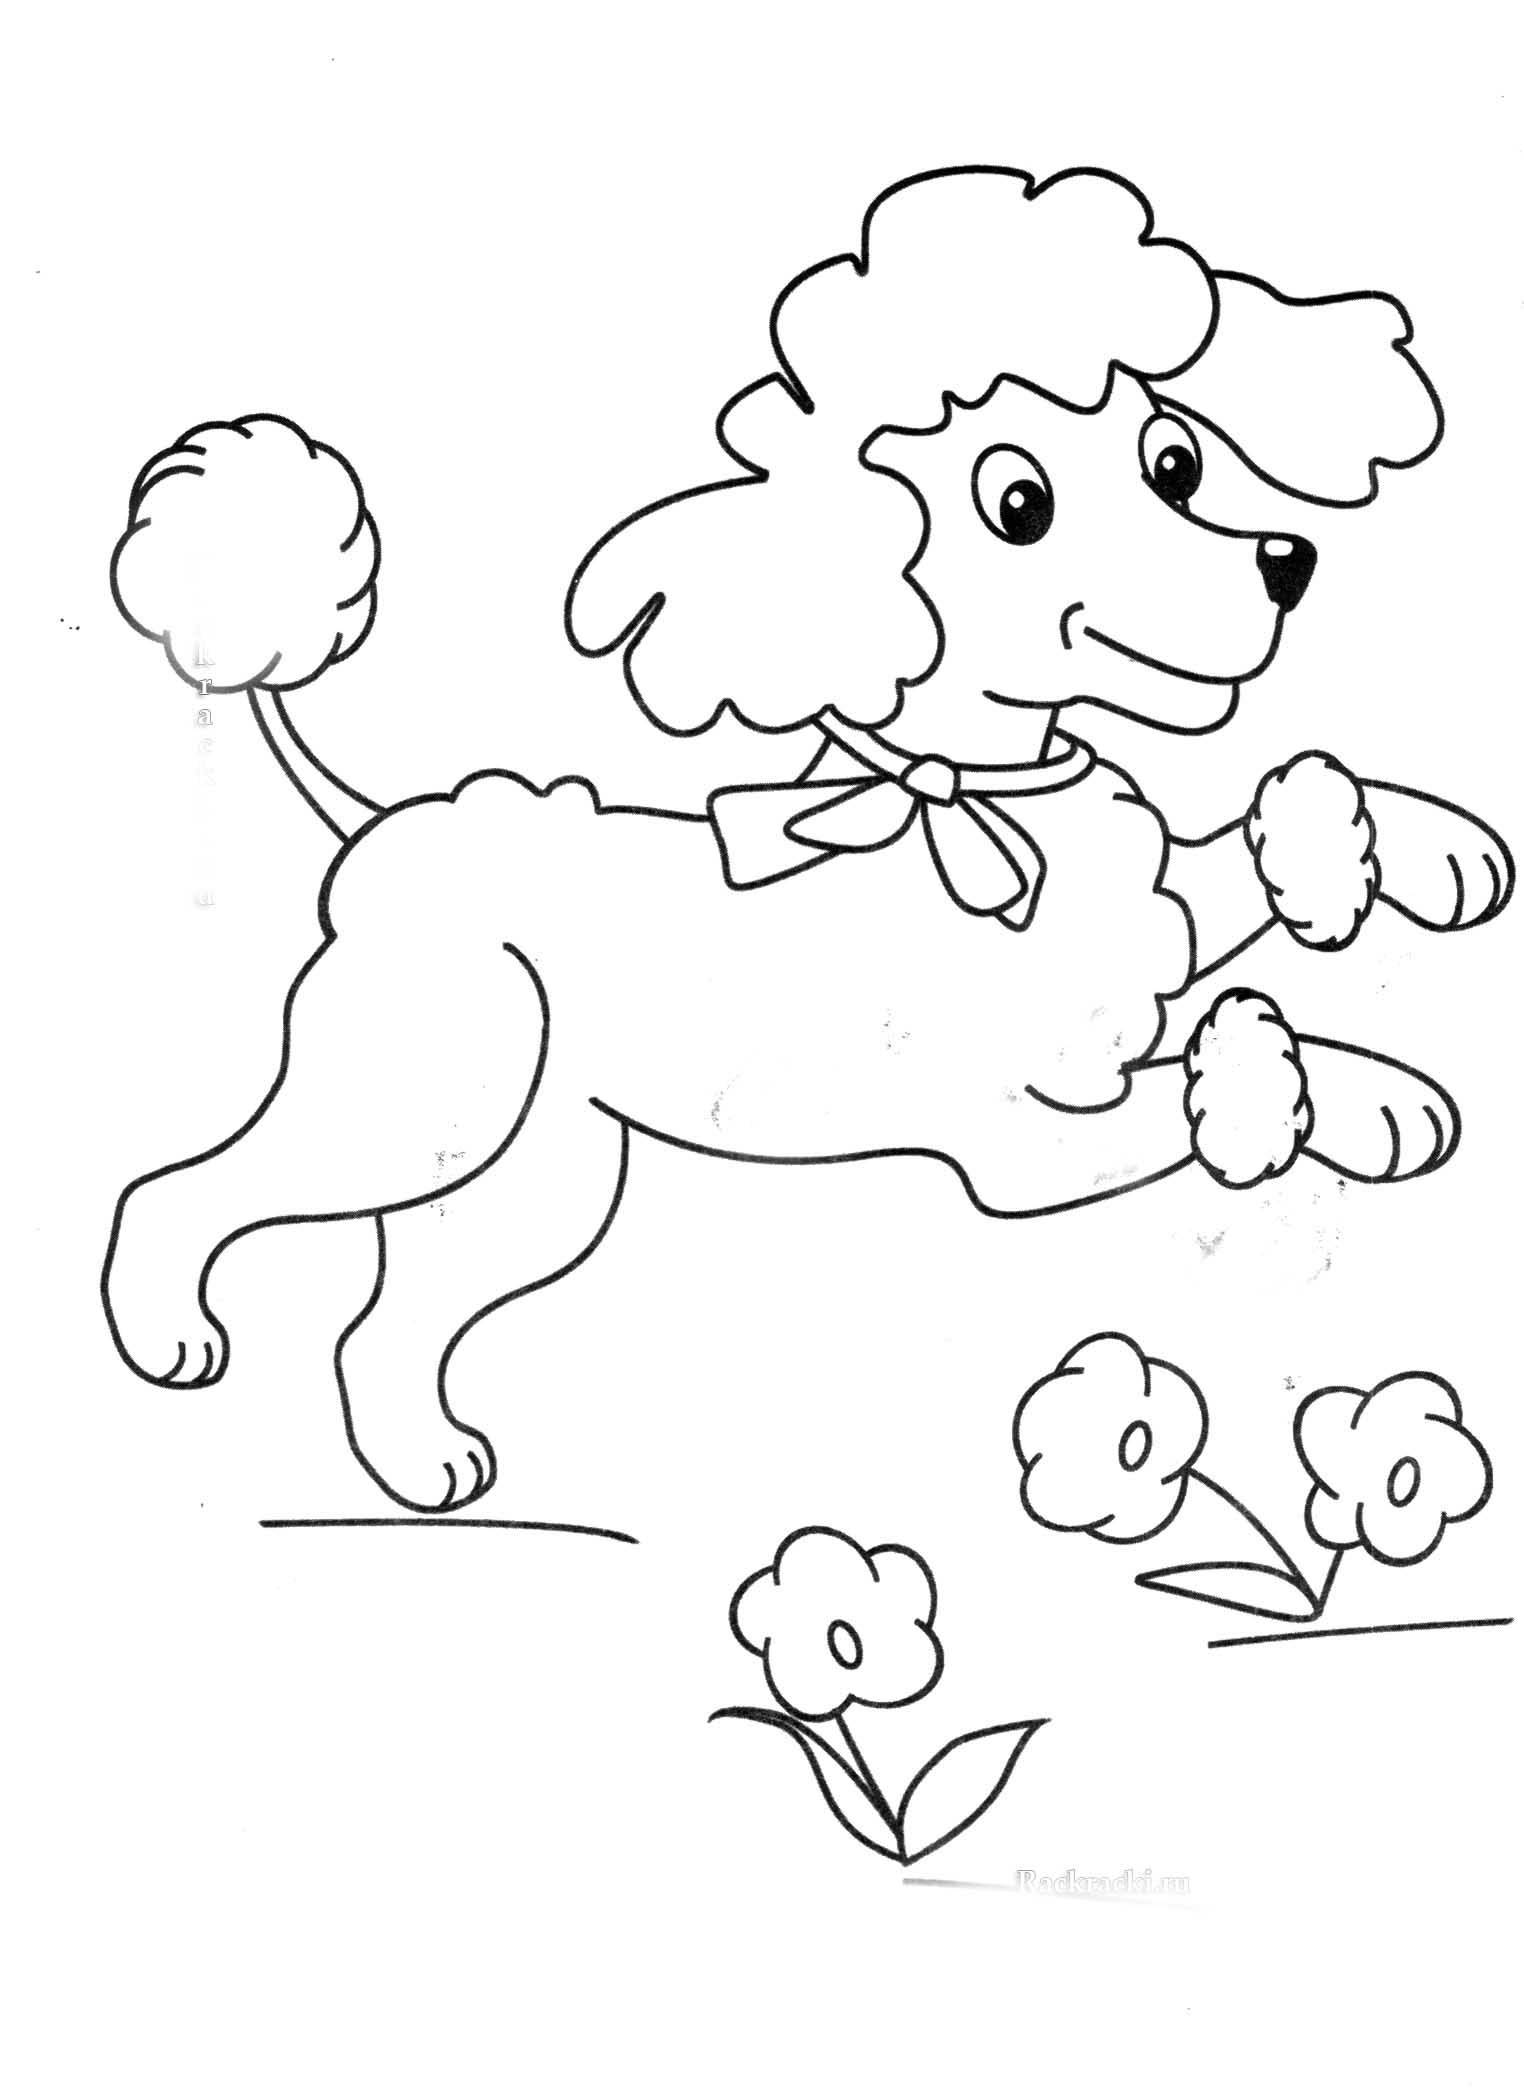 Poodle Coloring Pages to download and print for free